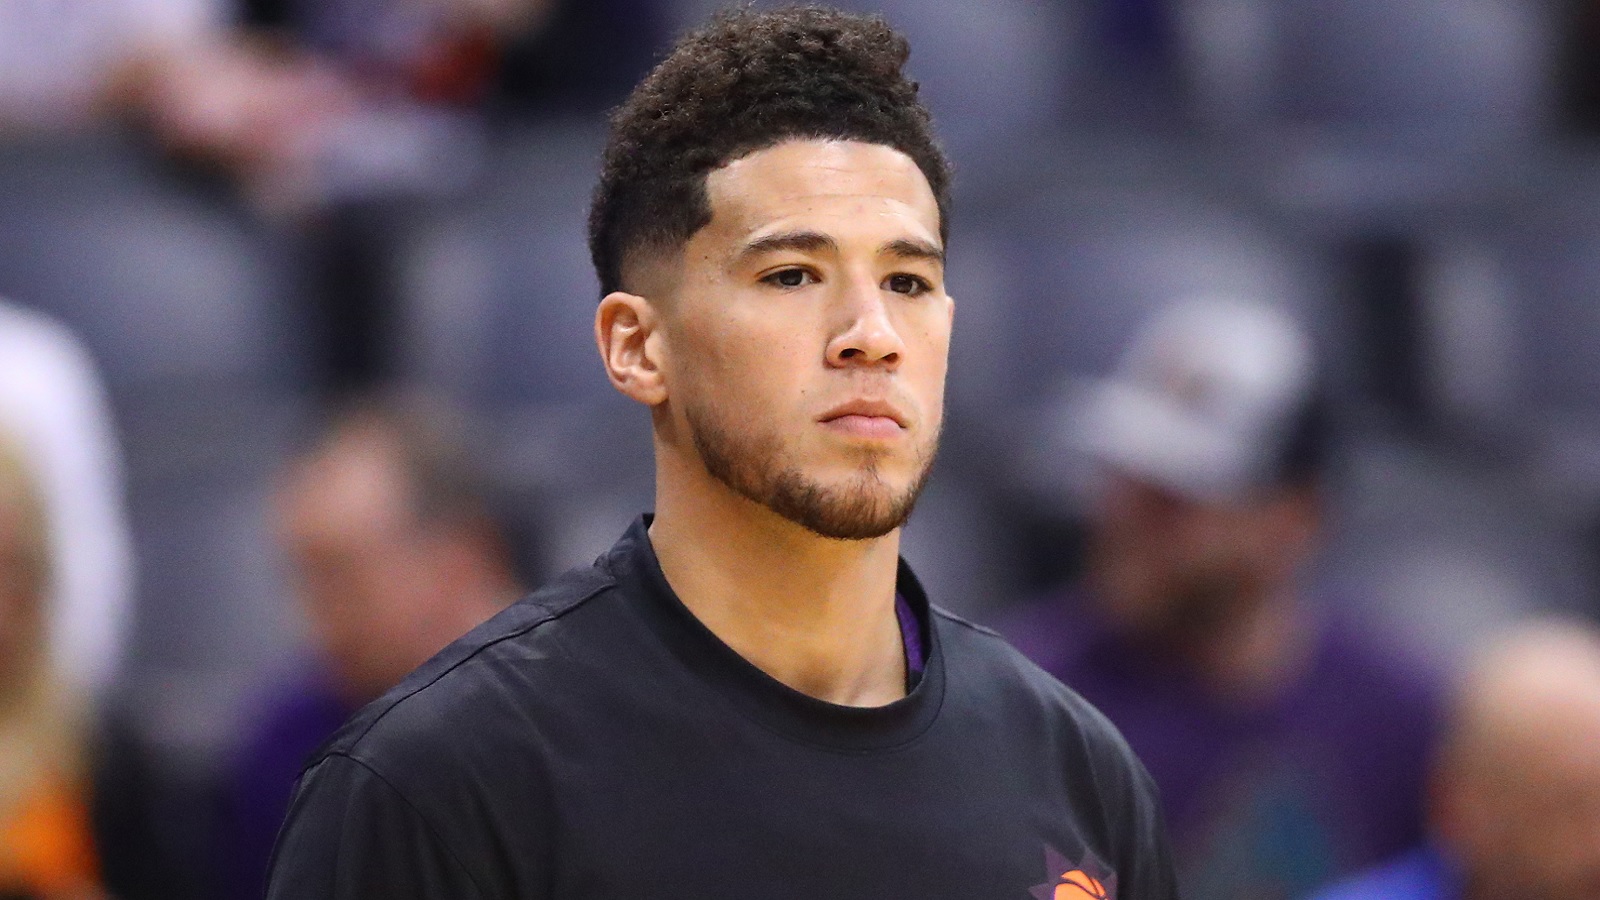 Devin Booker looks ready to play role for Team USA in Paris Olympics